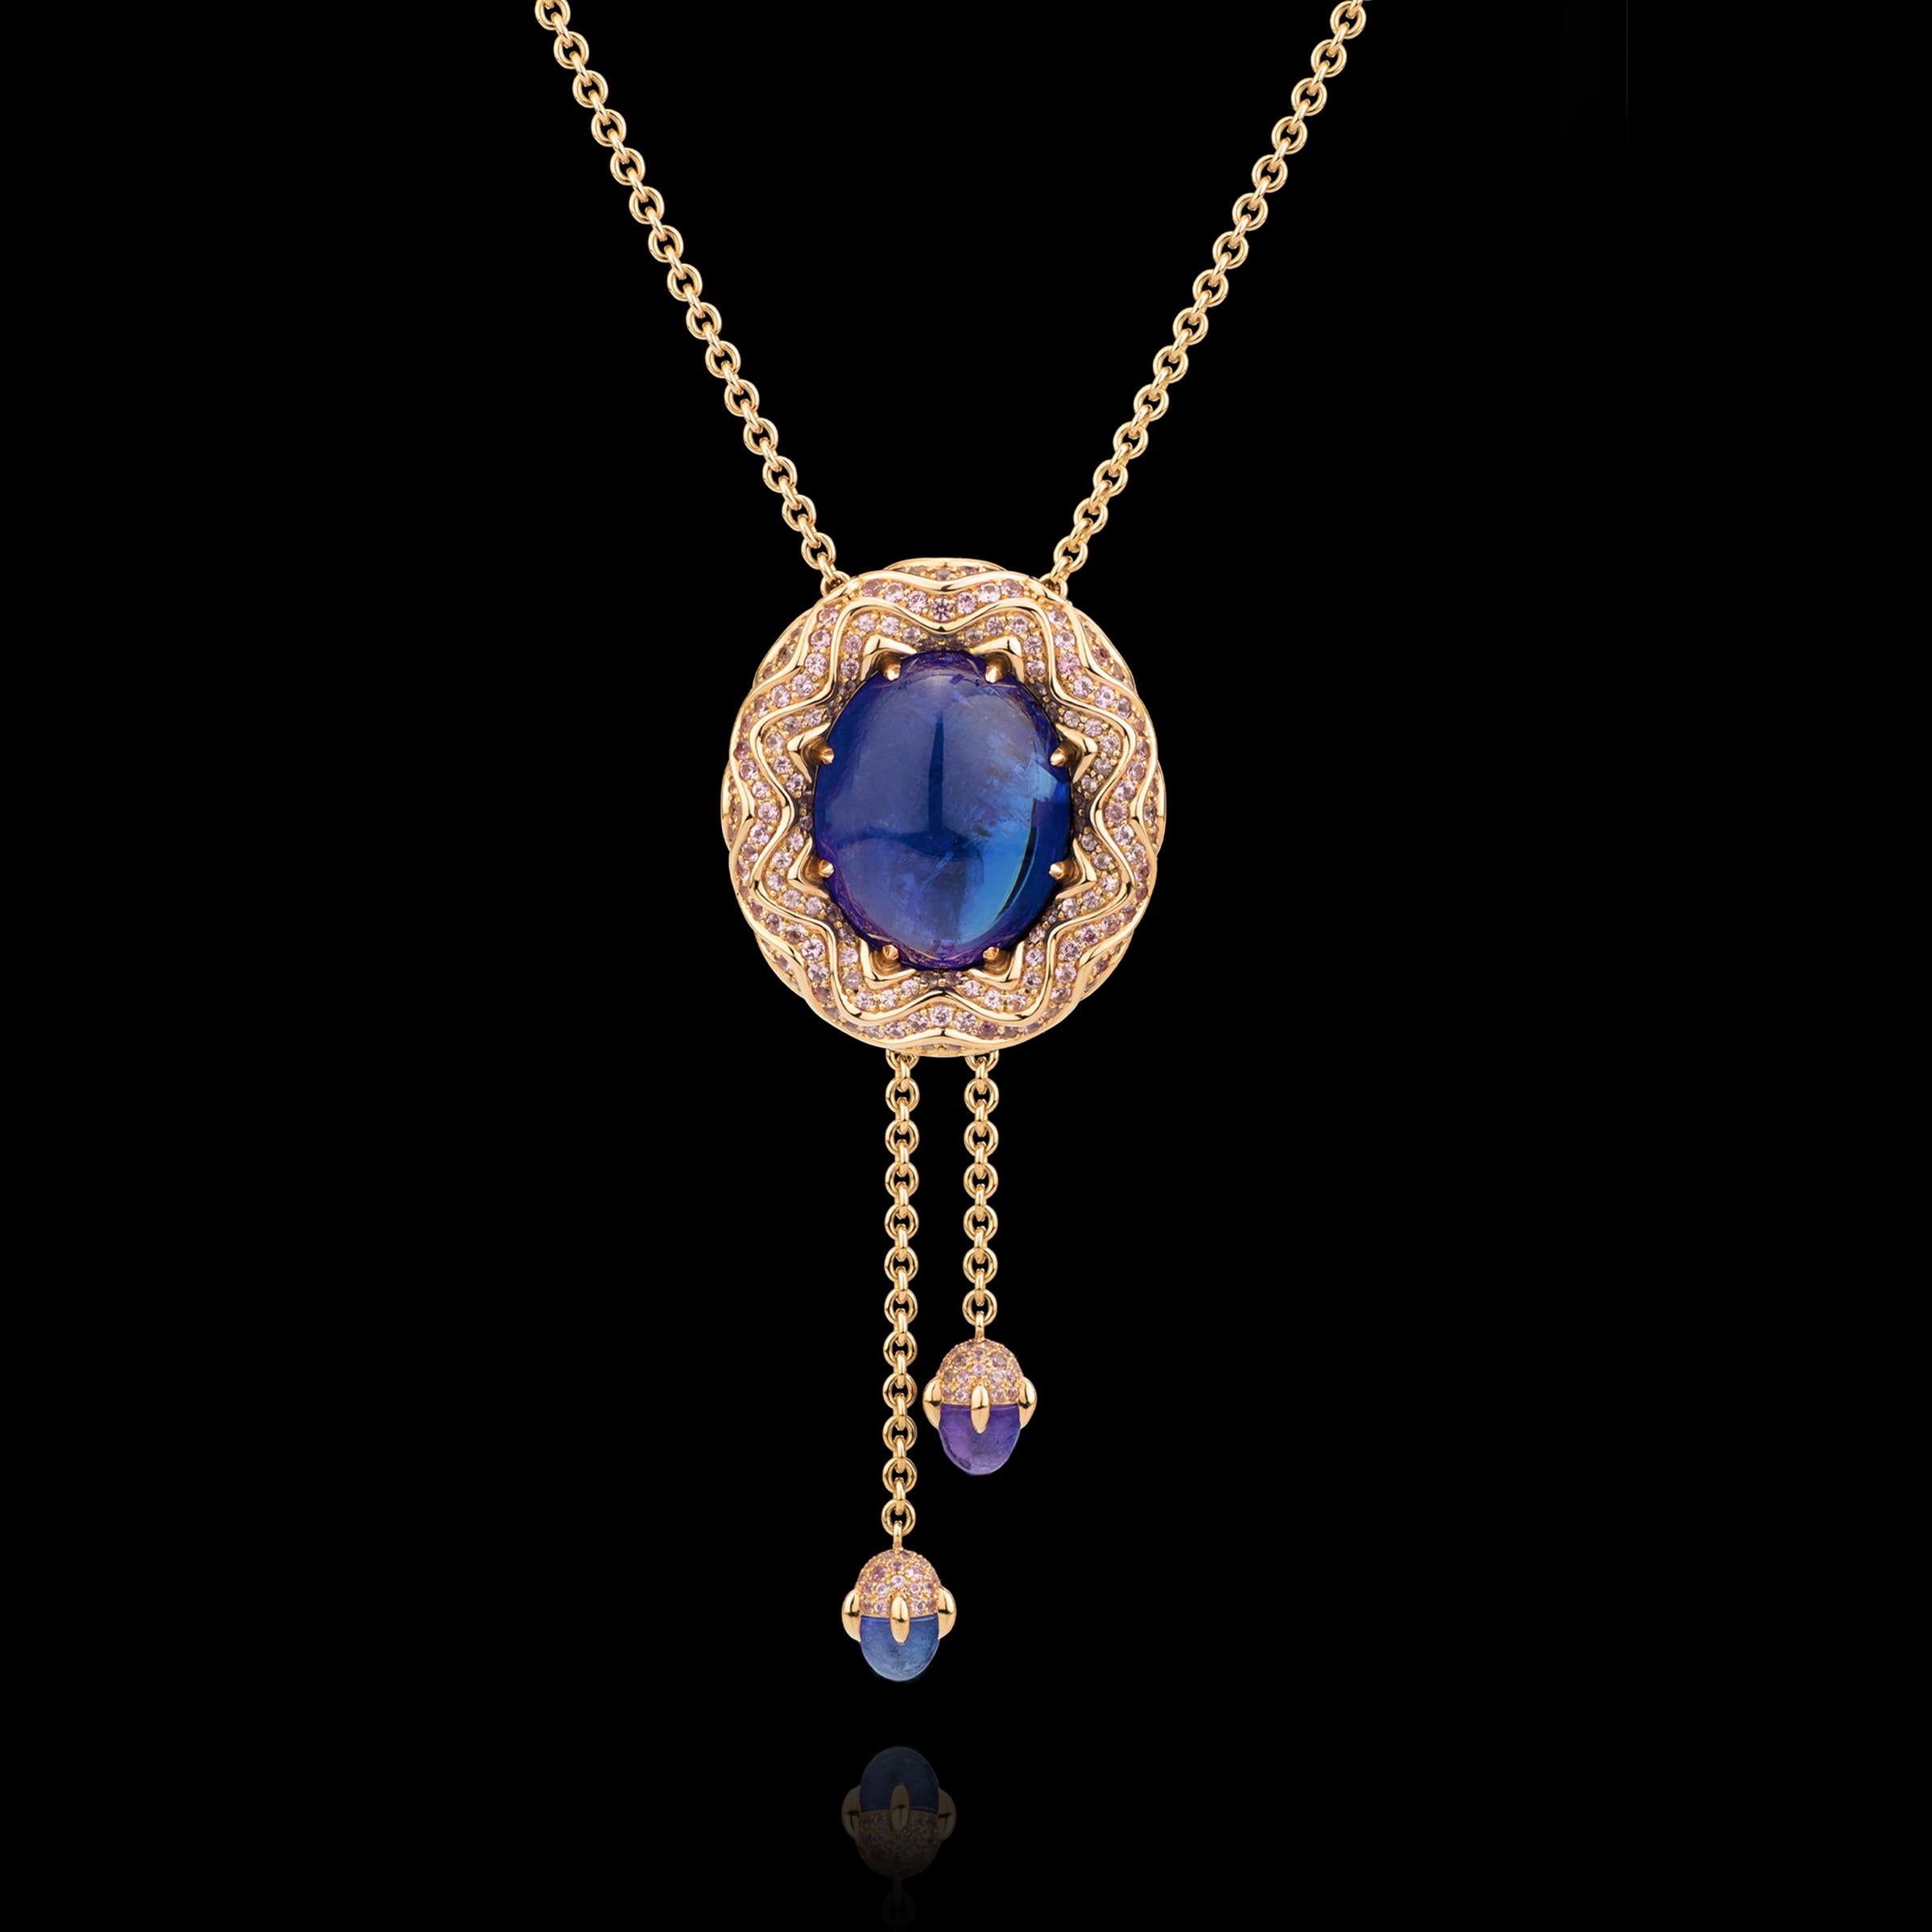 Enchanting tanzanite necklace from our Starlight Collection.
-Handmade of 18K rose gold.
-Center Stone: deep purplish blue cabochon cut tanzanite, 73,21ct.
-Handset with 332 rose-colored sapphires, ca 10ct total.
-2 dangling cabochon cut tanzanites,